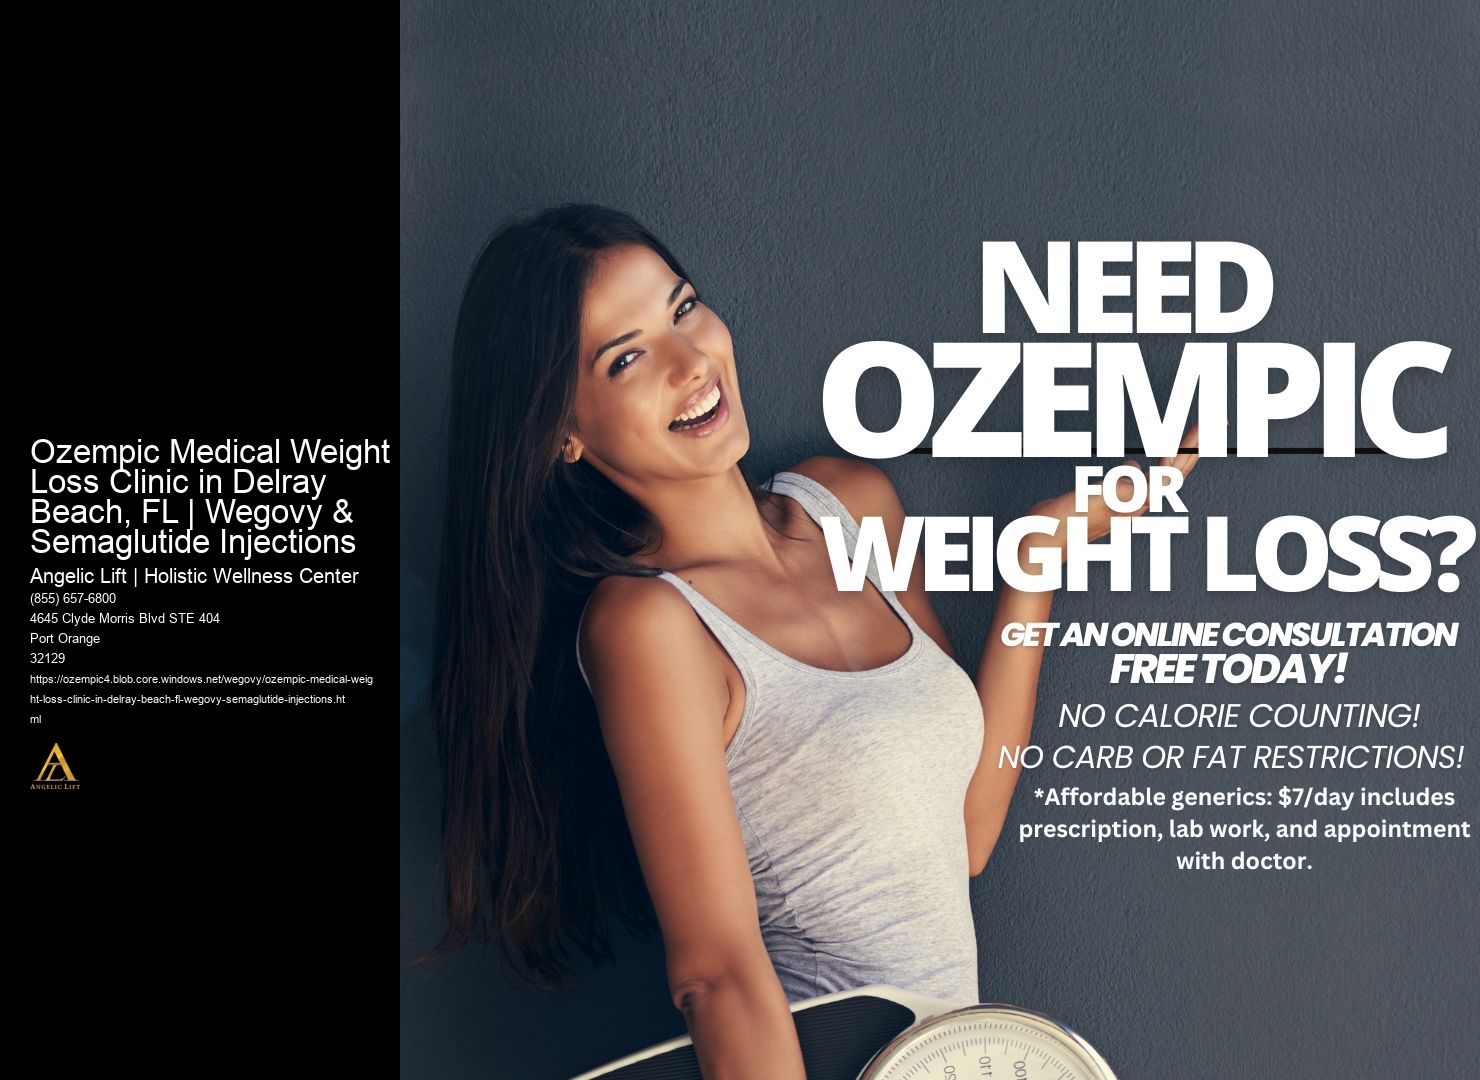 Ozempic Medical Weight Loss Clinic in Delray Beach, FL | Wegovy & Semaglutide Injections